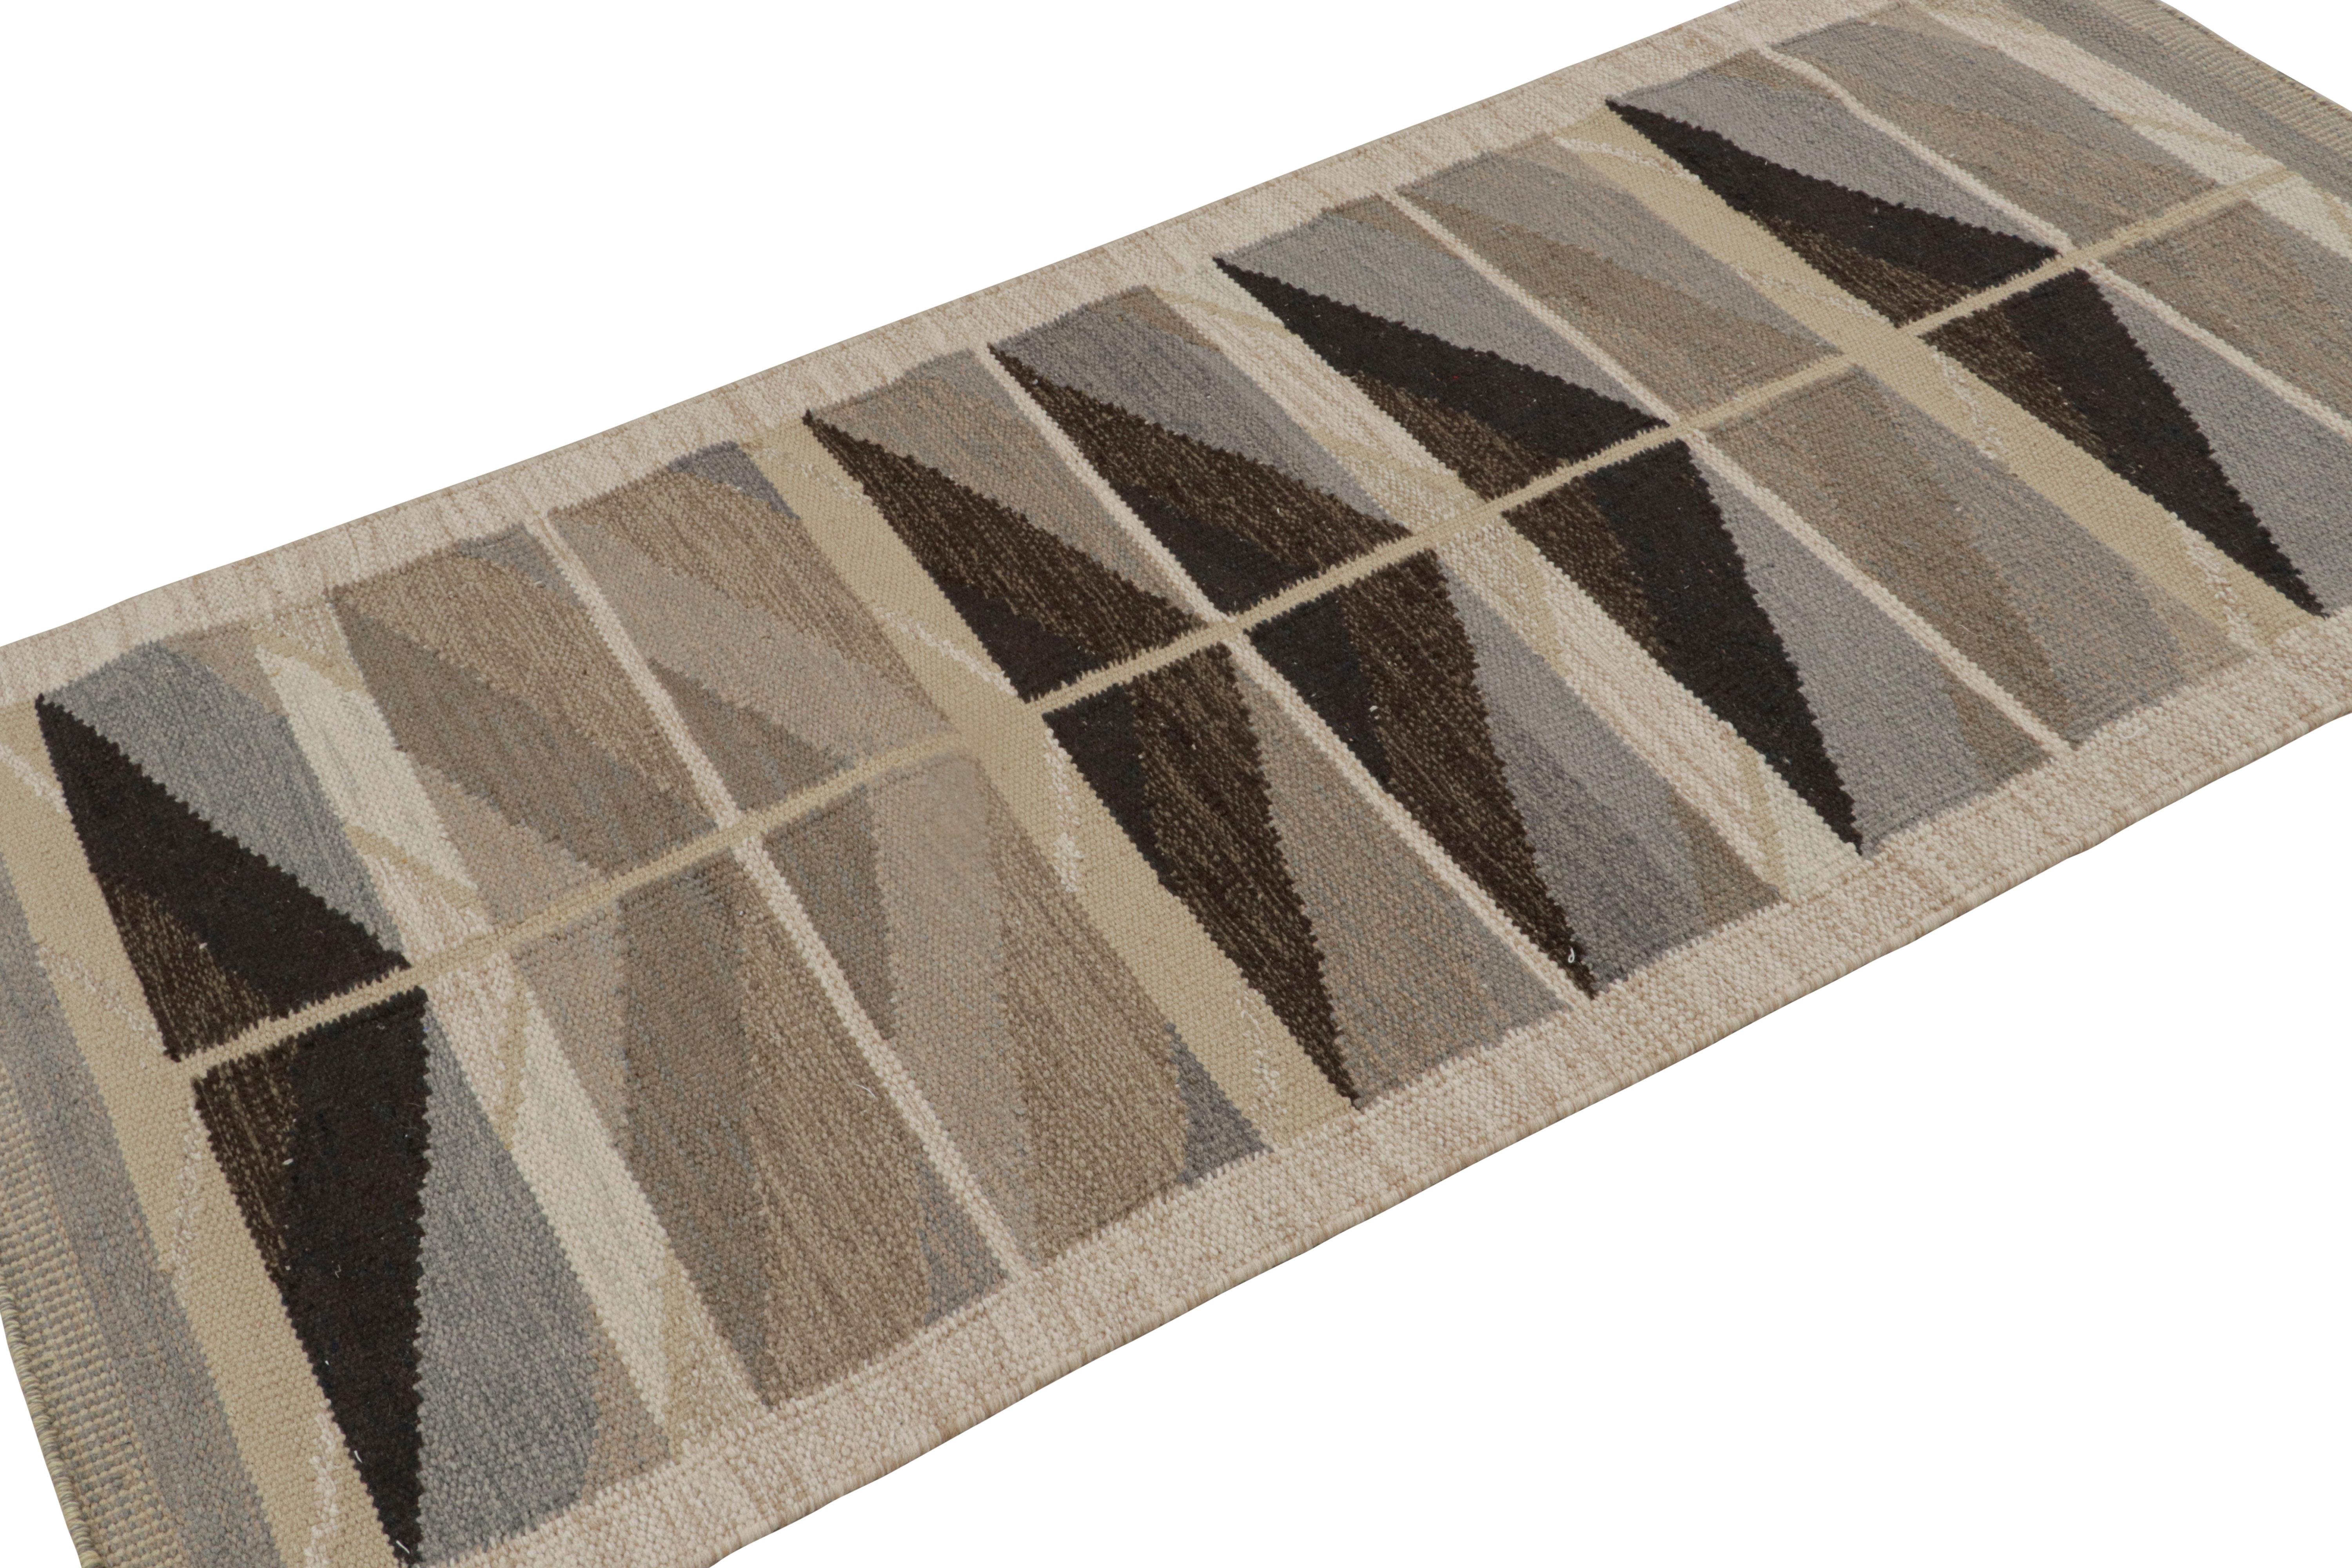 This 3x7 Swedish style kilim runner is from the award-winning Scandinavian rug collection by Rug & Kilim. Handwoven in wool, this flatweave is inspired by Swedish Deco Rollakan and Rya rugs.

On the Design: 

The beige-brown tones underscore a row